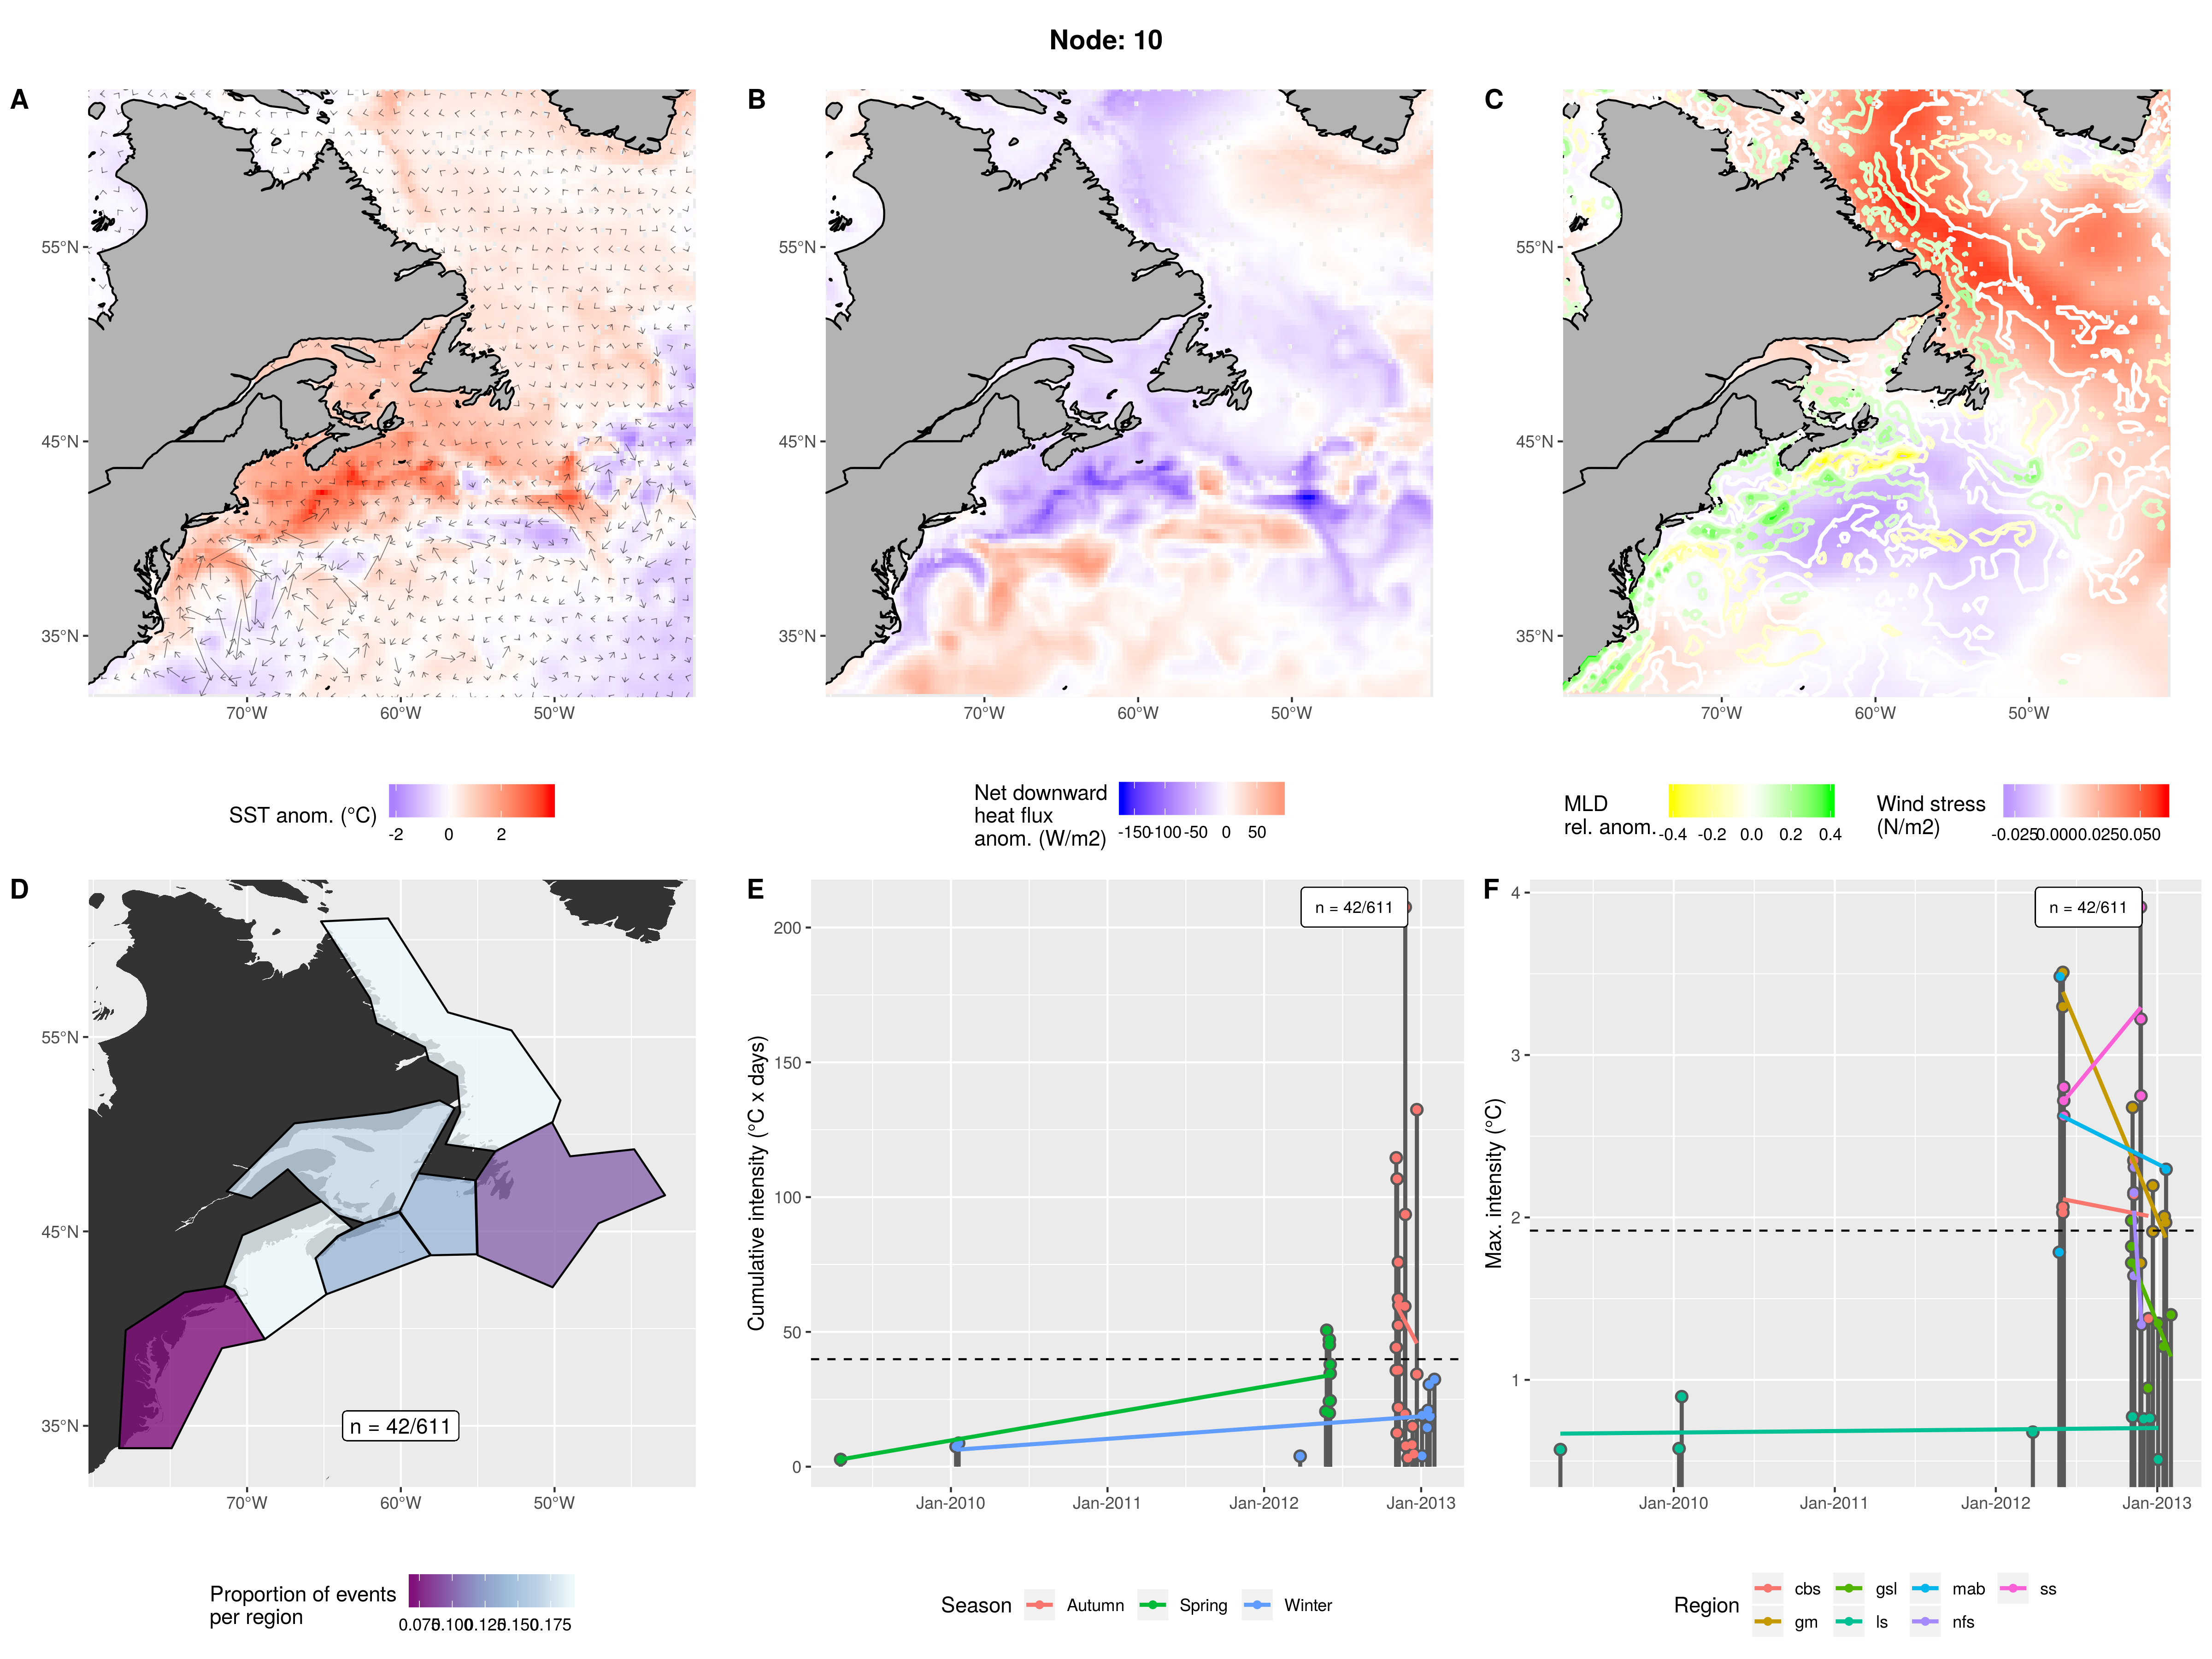 Very unstable mostly cold GS with warm GM and SS waters. Negative heat flux into shelf waters and positive into GS. High wind stress over LS and low over shelf waters. Deep GS and GM waters but shallow over SS. Spread out over most regions with fewest events in mab and nfs. A few tiny events from 2009 - 2011 but really got going from 2012 - 2013. Spring of 2013 was small while Autumn/WInter of 2012/13 was noteworthy.